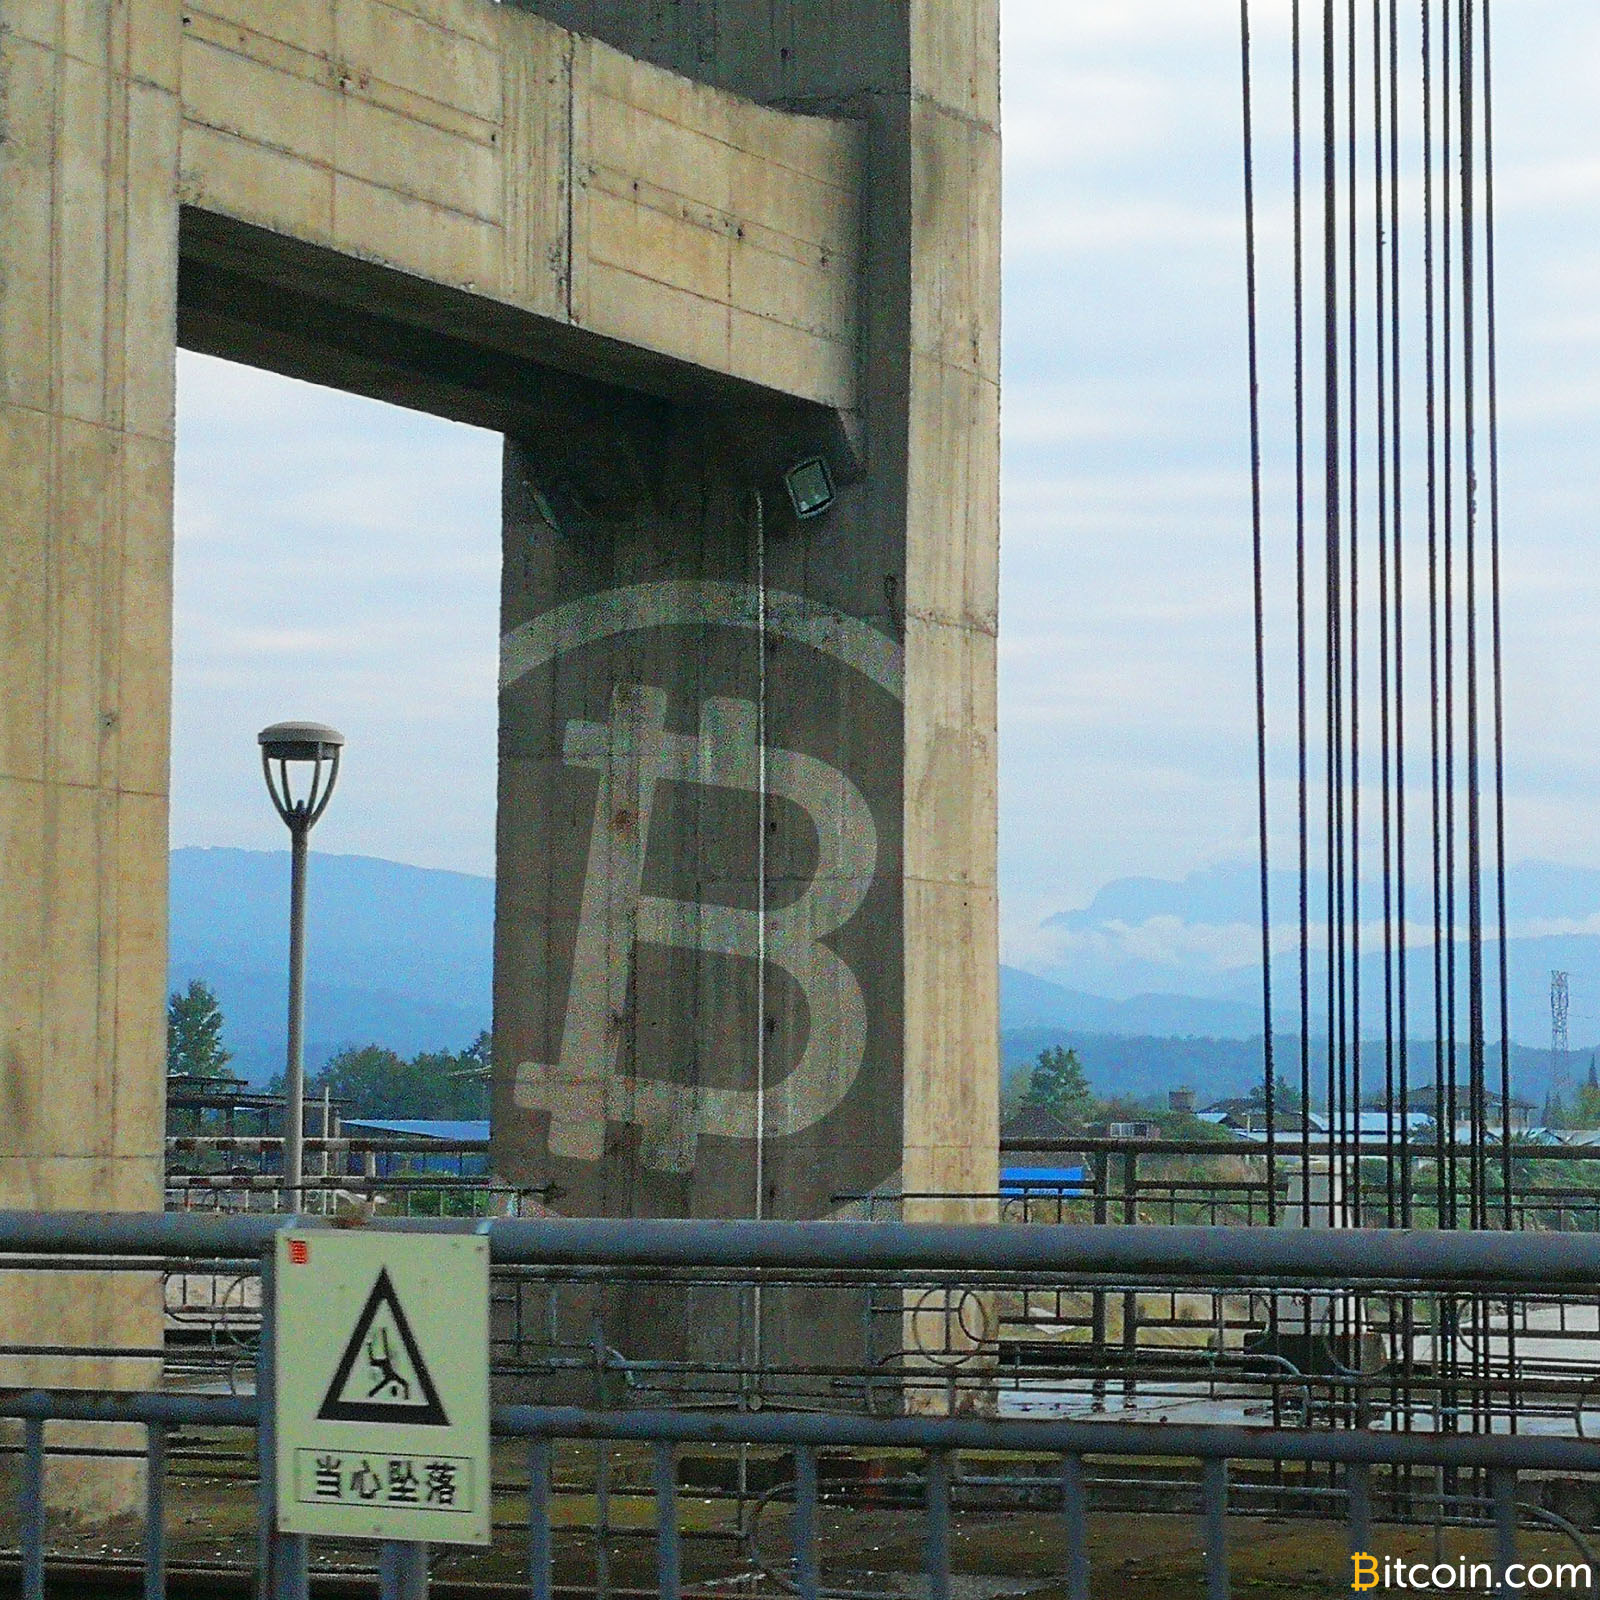 A Visit to a Bitcoin Mining Farm in Sichuan, China Reveals Troubles Beyond Regulation